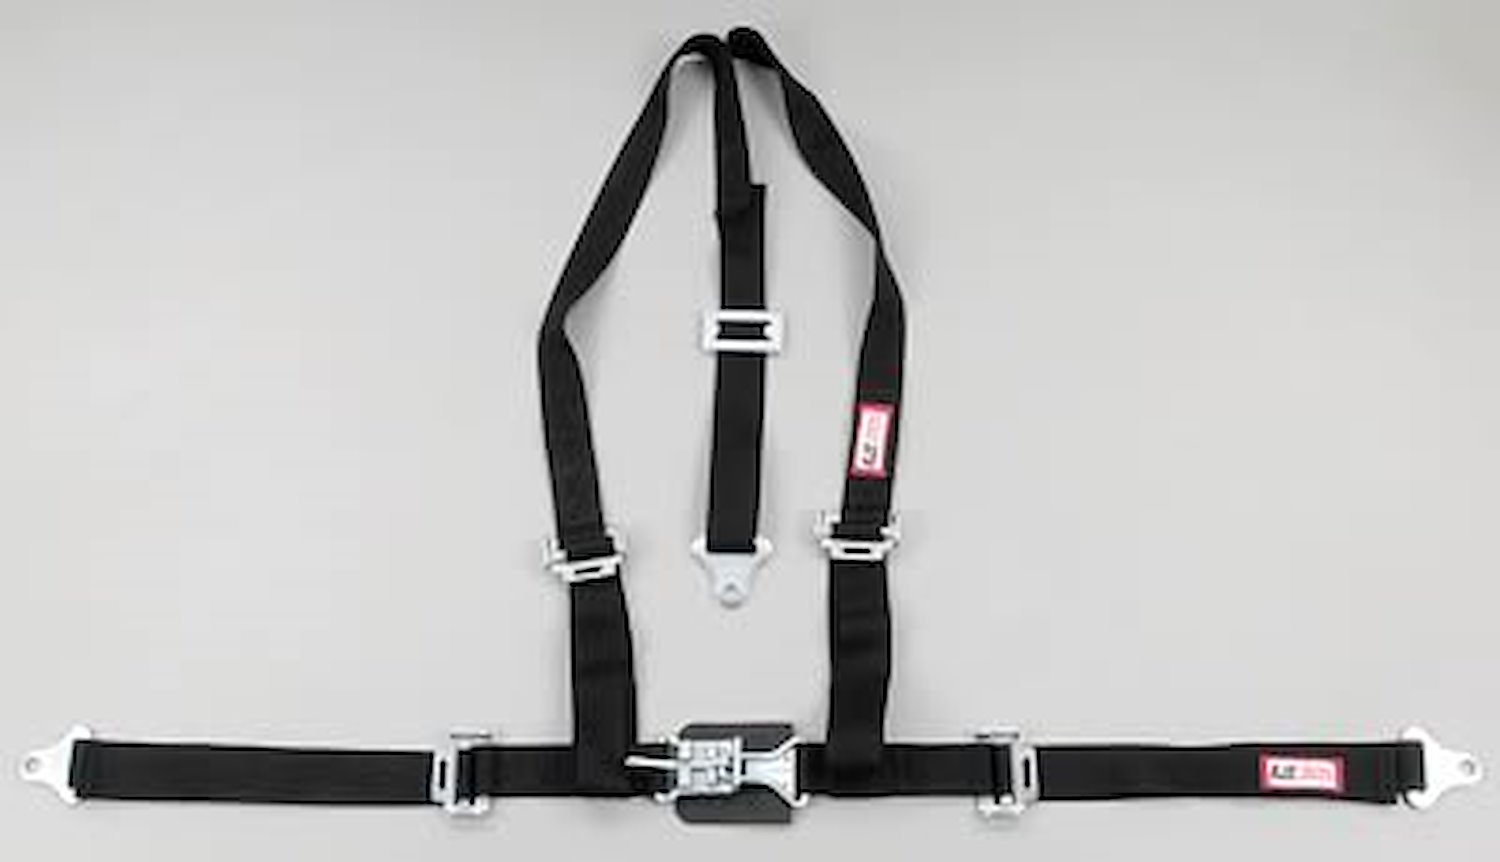 NON-SFI L&L HARNESS 2 PULL DOWN Lap Belt w/Adjuster SNAP 2 S.H. Individual FLOOR MOUNT w/STERNUM STRAP WRAP/SNAP RED